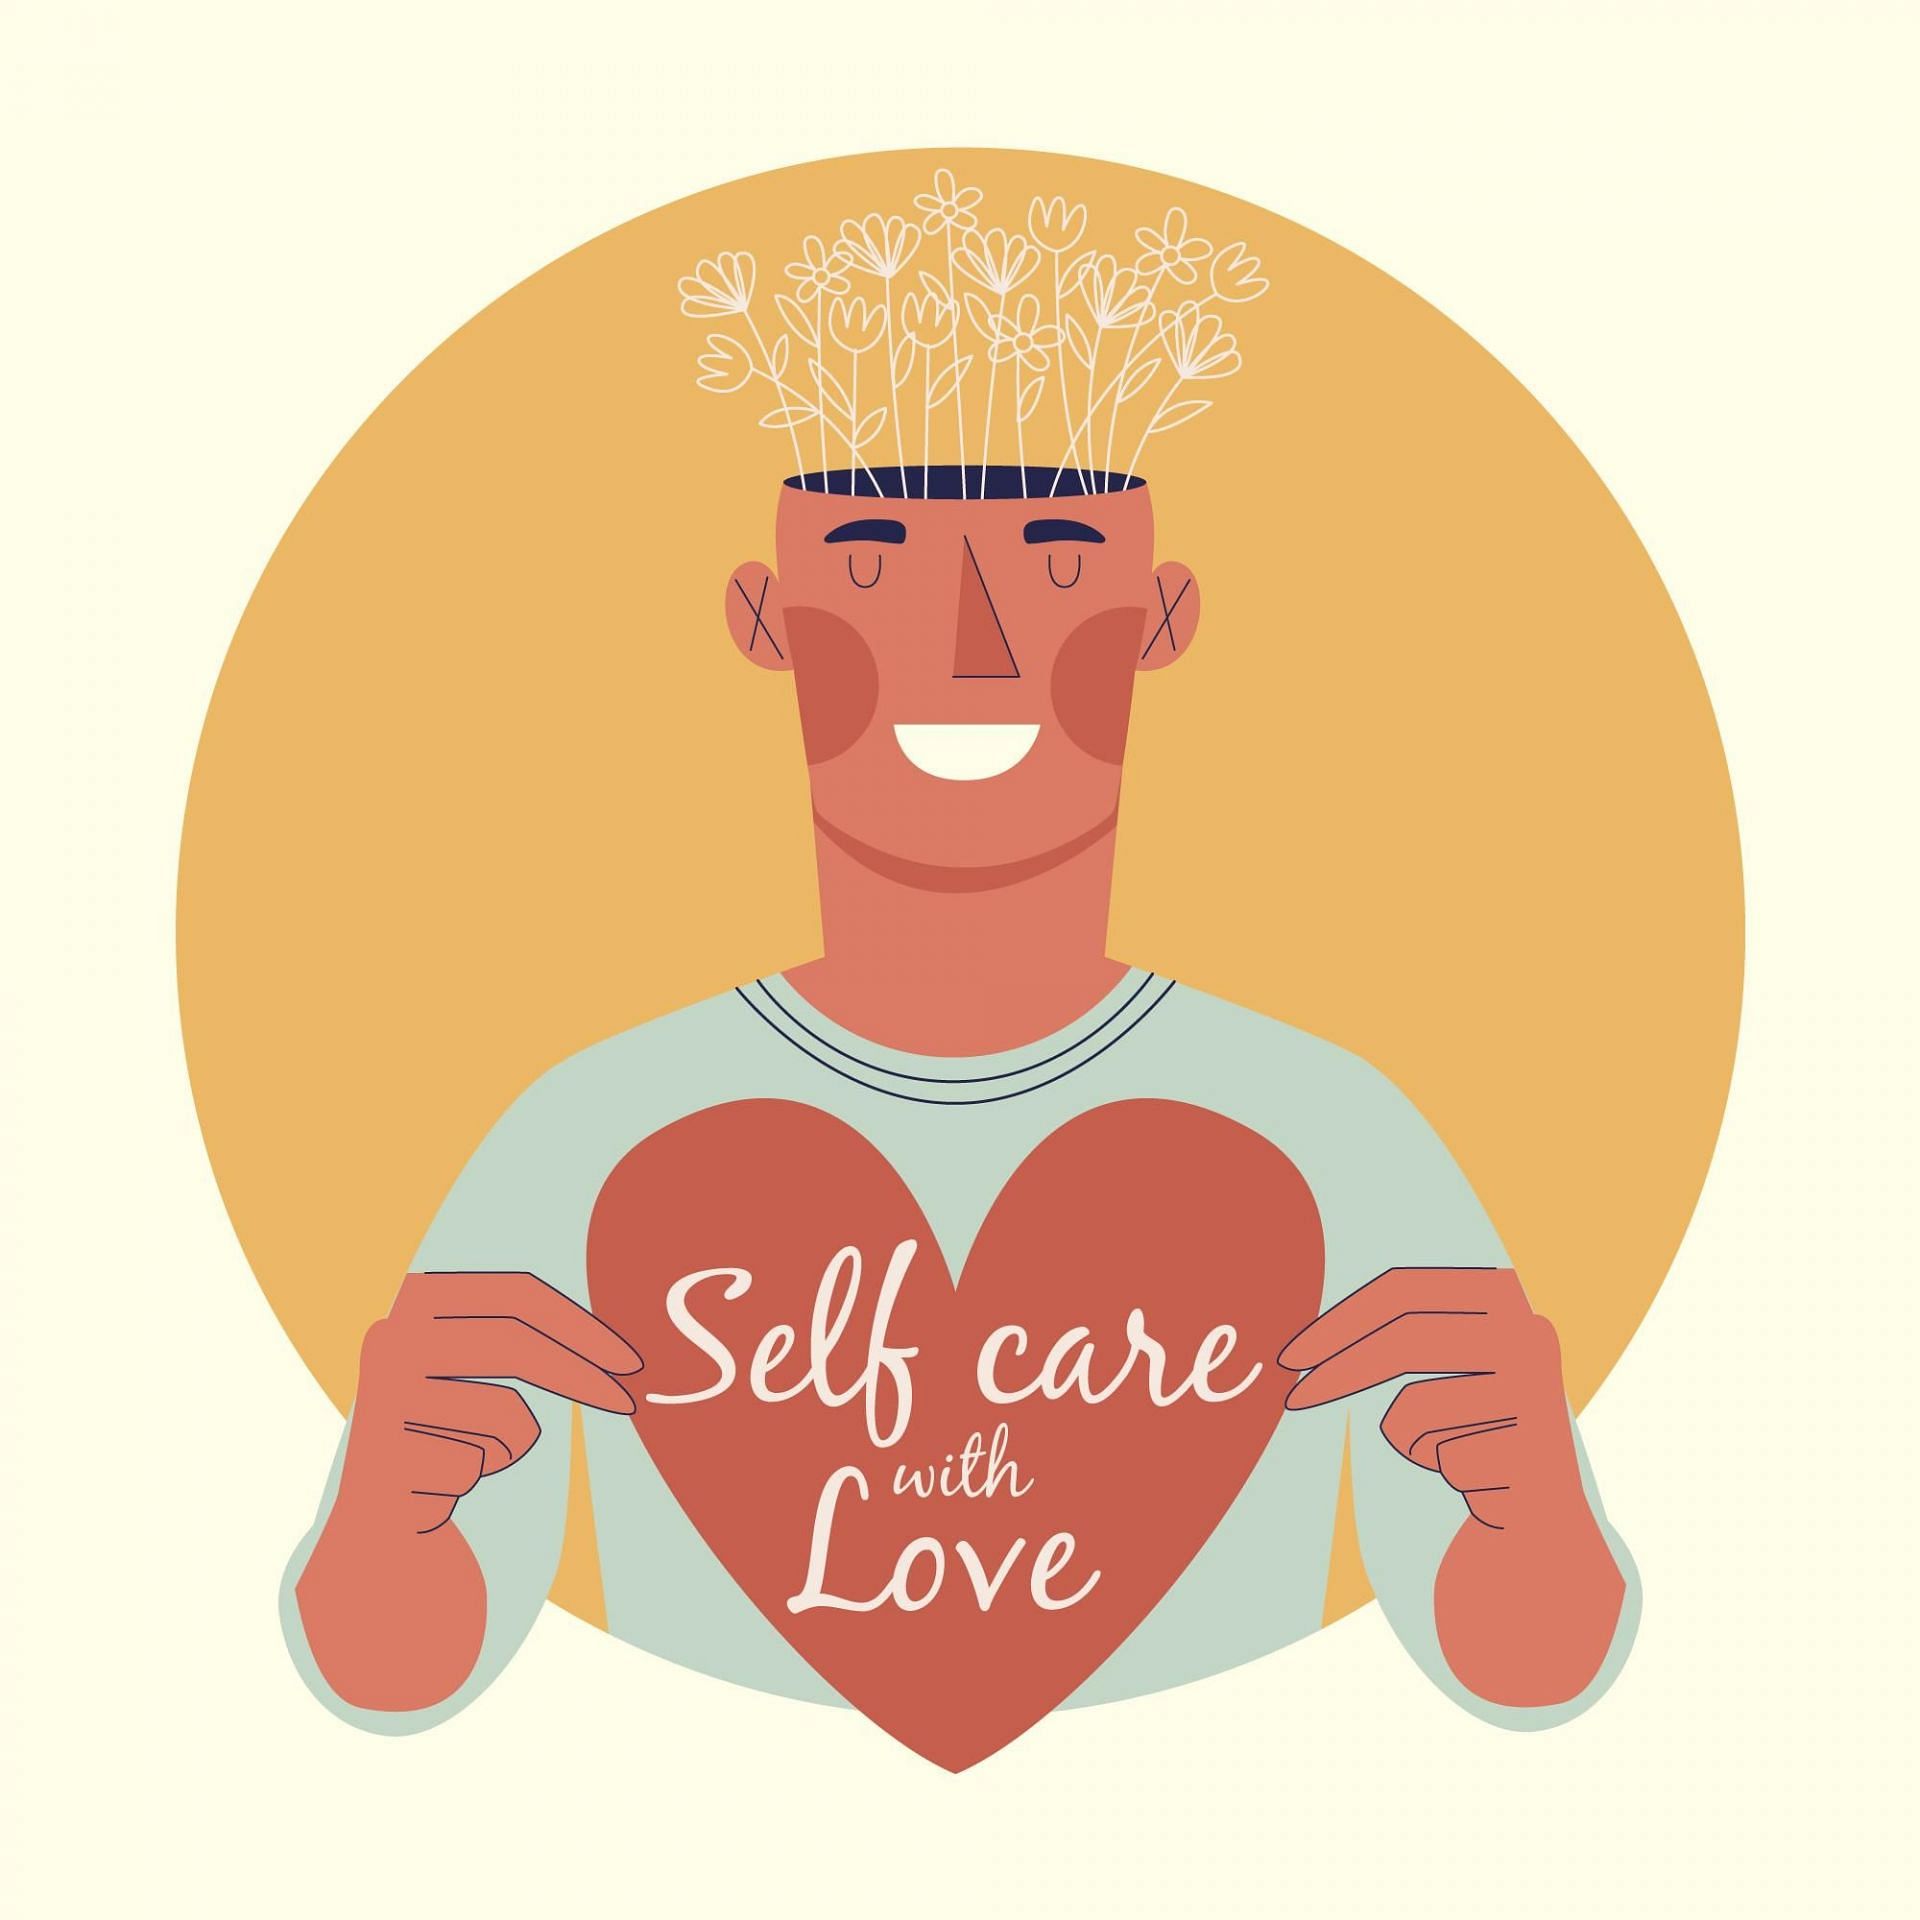 There are multiple steps you can take to enhance your love towards yourself. (Image via Freepik/ Freepik)